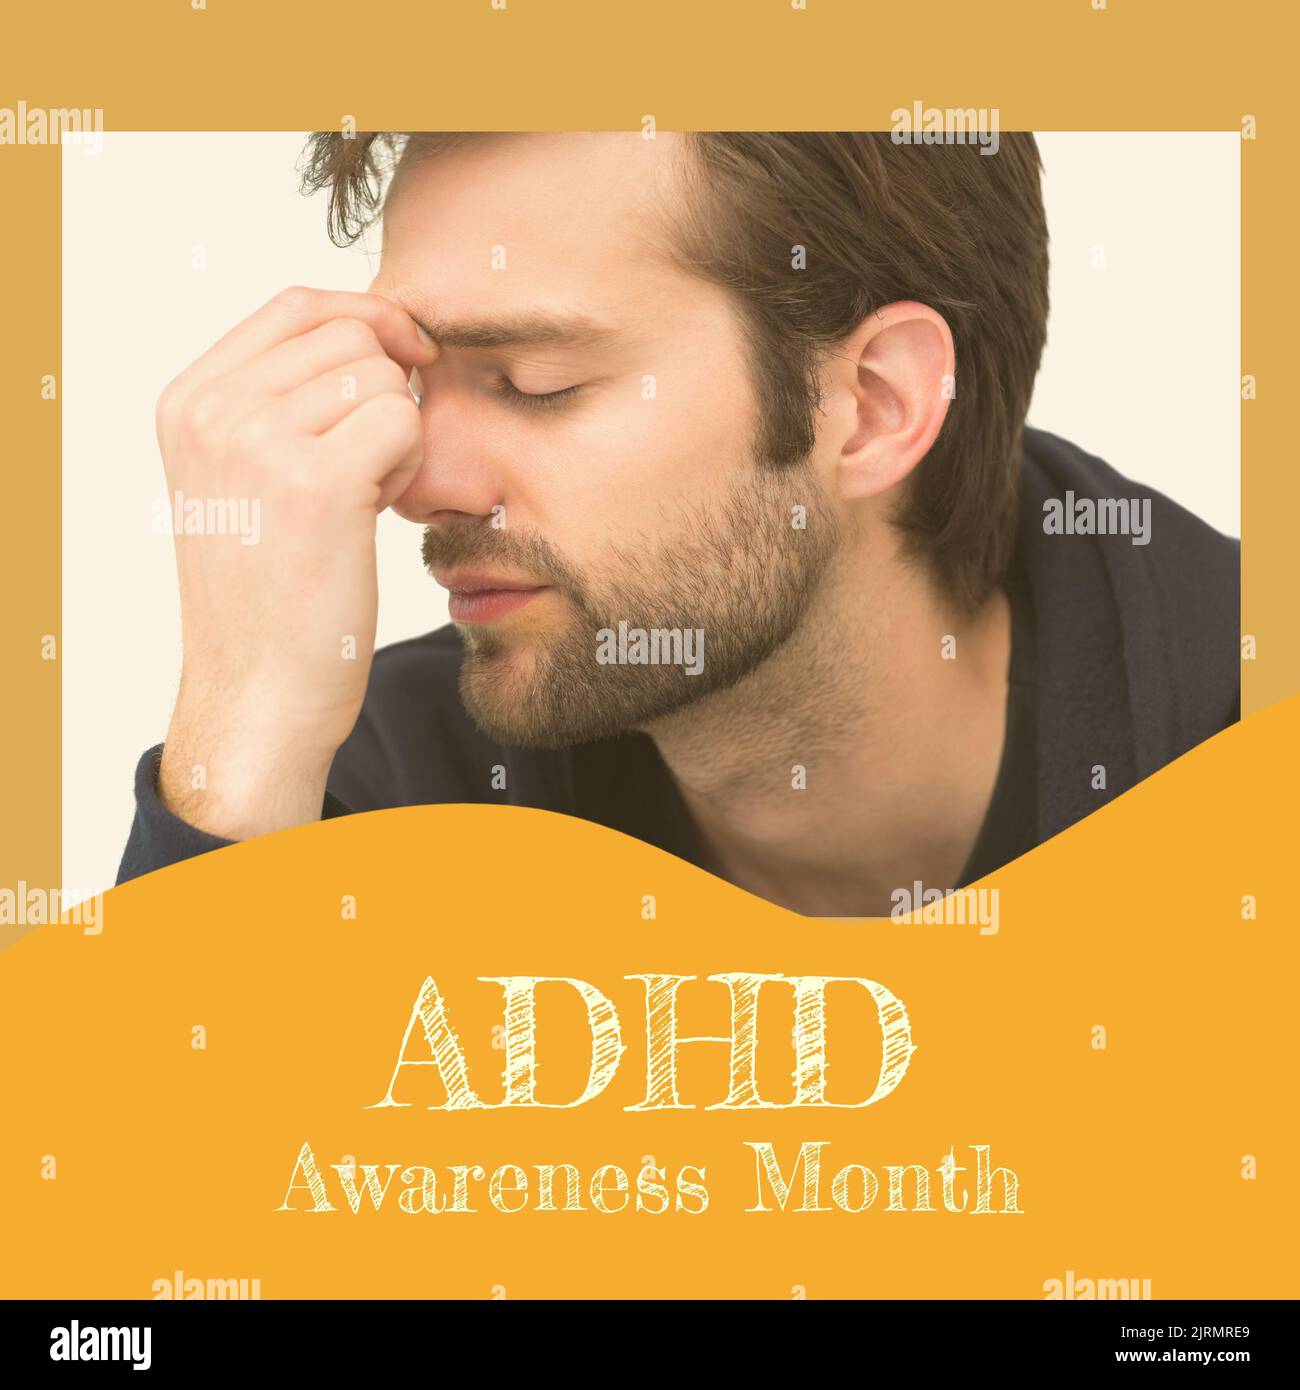 Digital composite image of worried caucasian mid adult man with adhd awareness month text Stock Photo